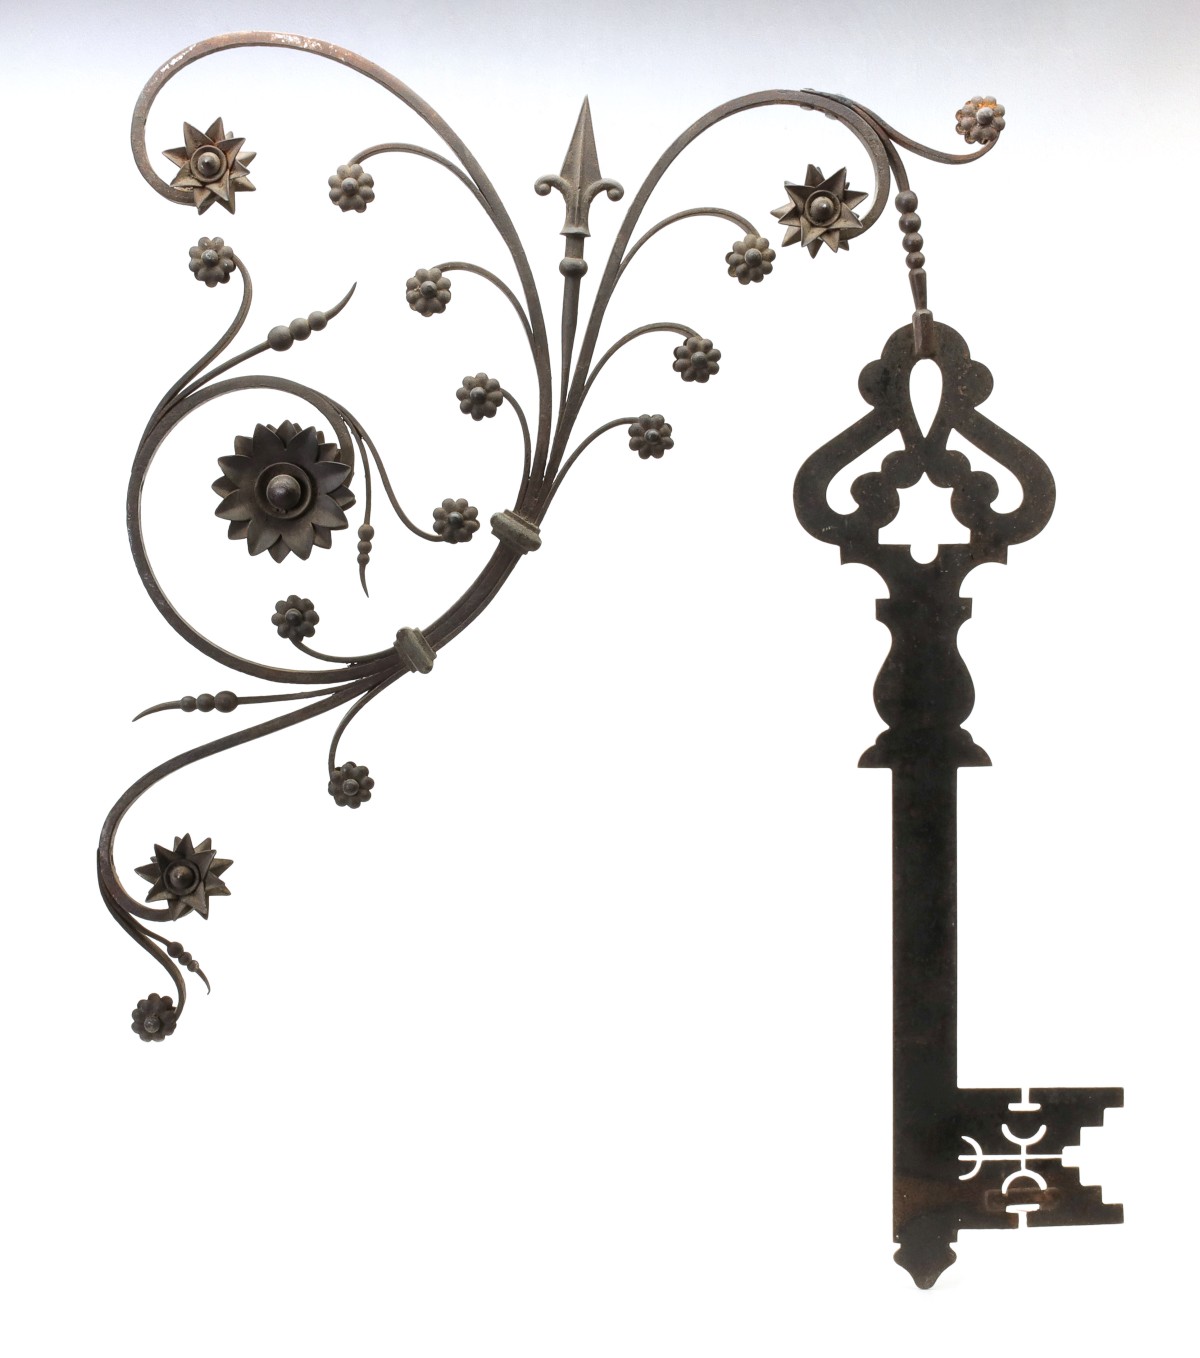 AN OUTSTANDING WROUGHT IRON TRADE SIGN WITH KEY